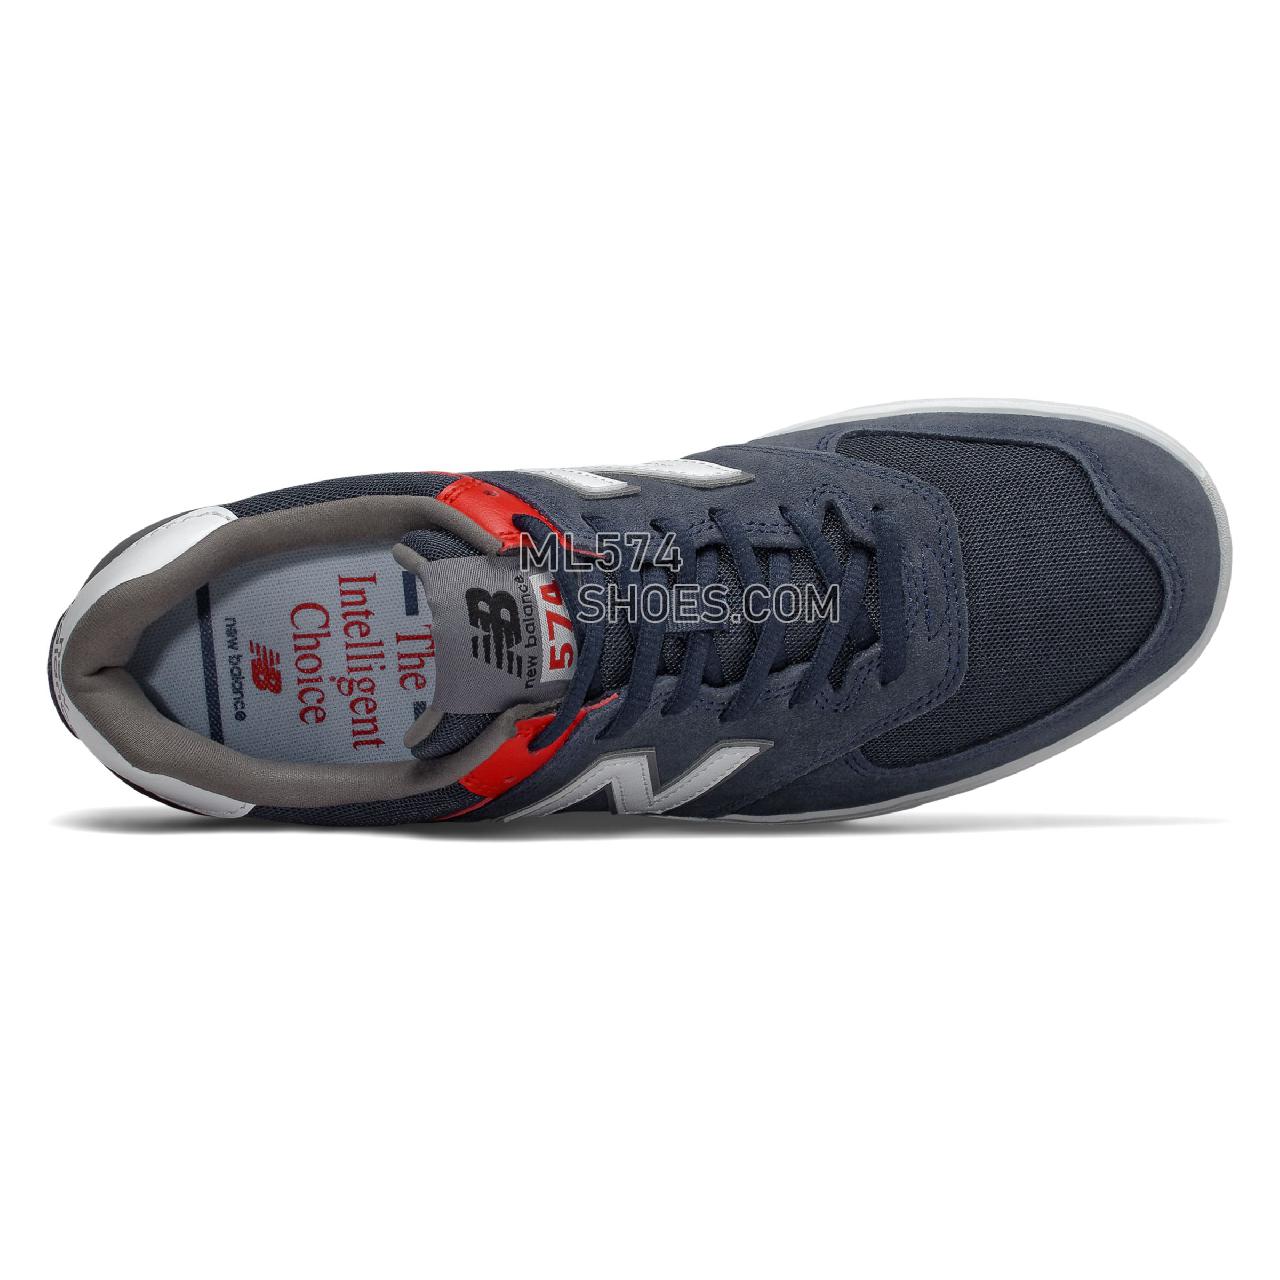 New Balance All Coasts 574 - Men's All Coasts 574 - Navy with White - AM574NVR